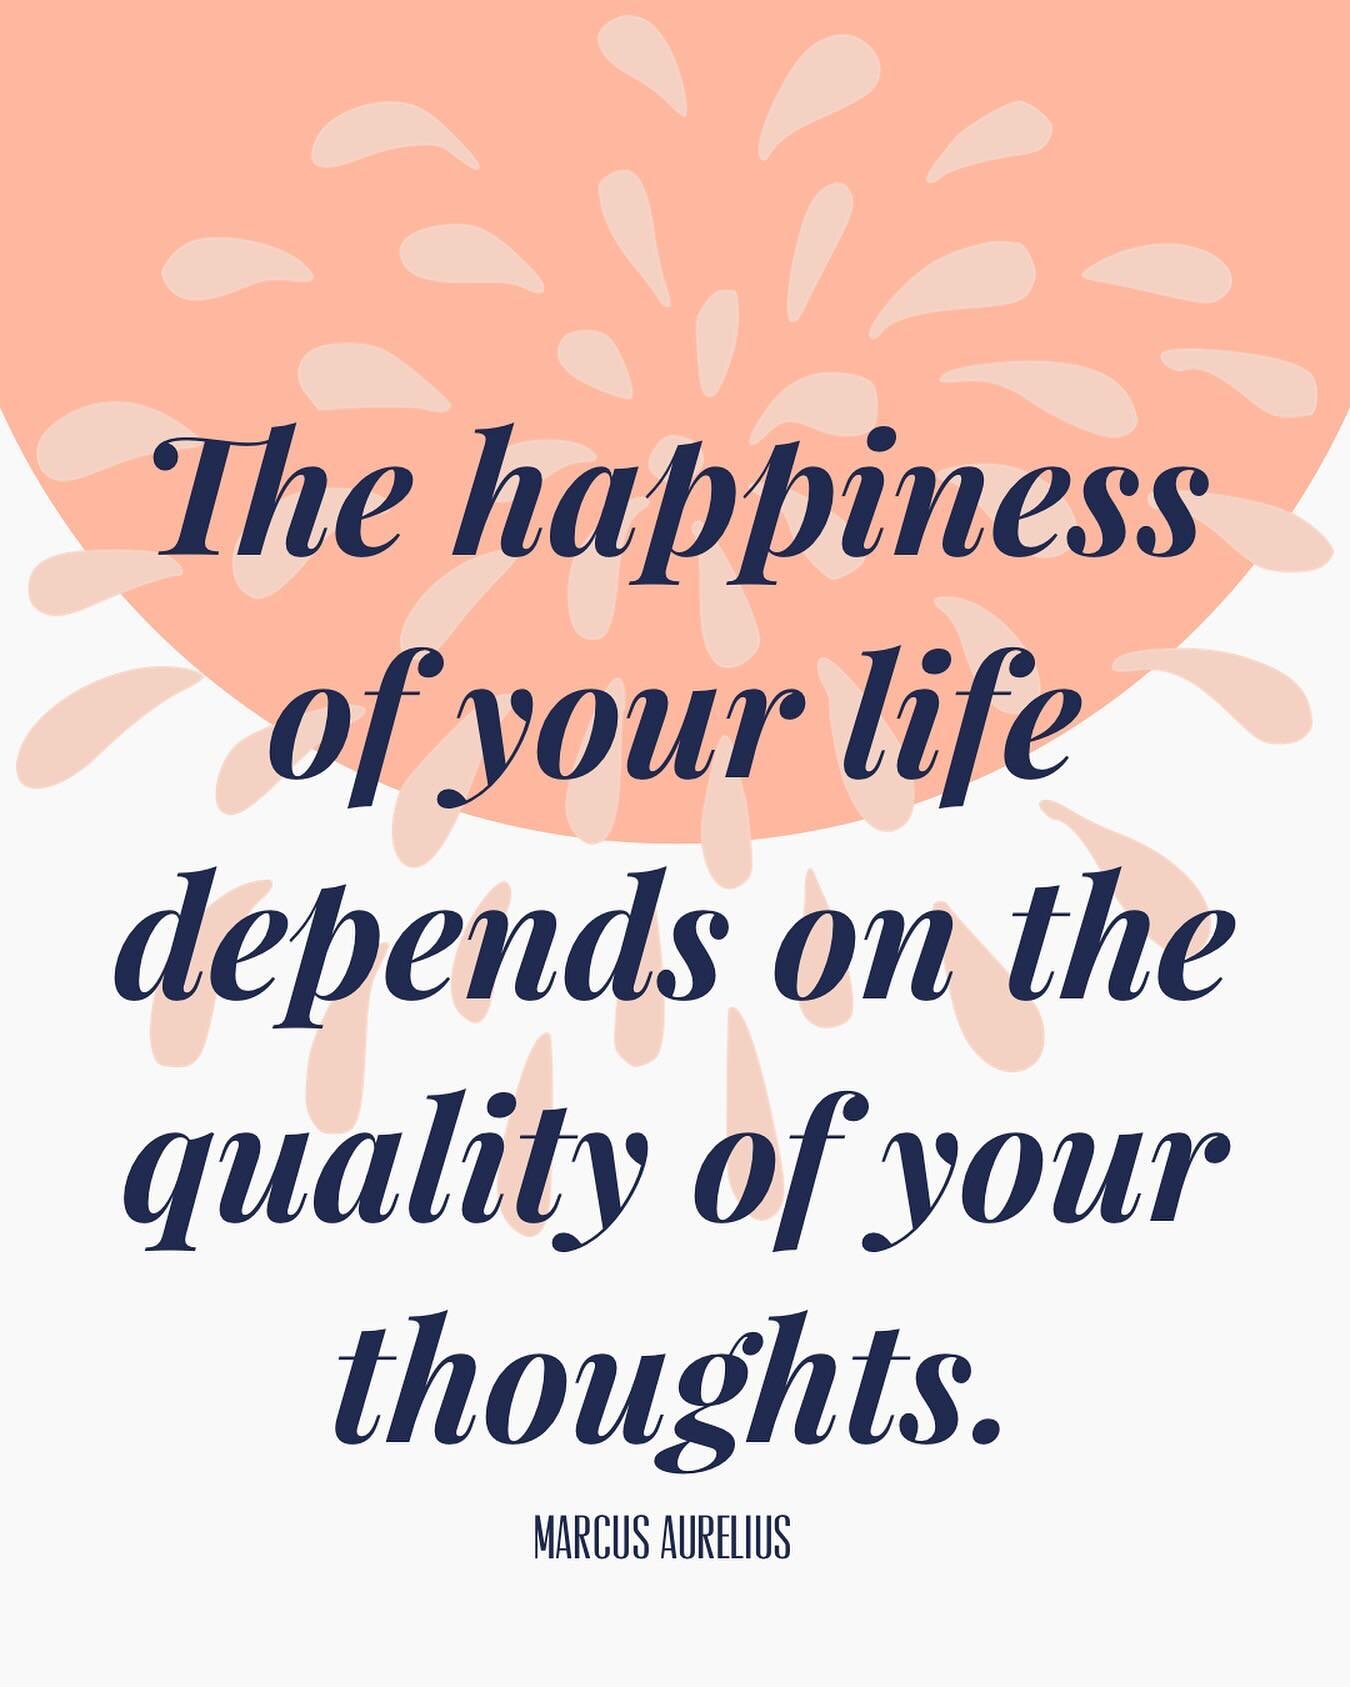 Evidence shows how we think affects how we feel and how we act. Unhelpful thoughts lead to sad/mad/upset feelings and unhelpful or unhealthy behaviors. Helpful and hopeful thoughts lead to feelings of happiness/peace/clam and helpful or healthy behav